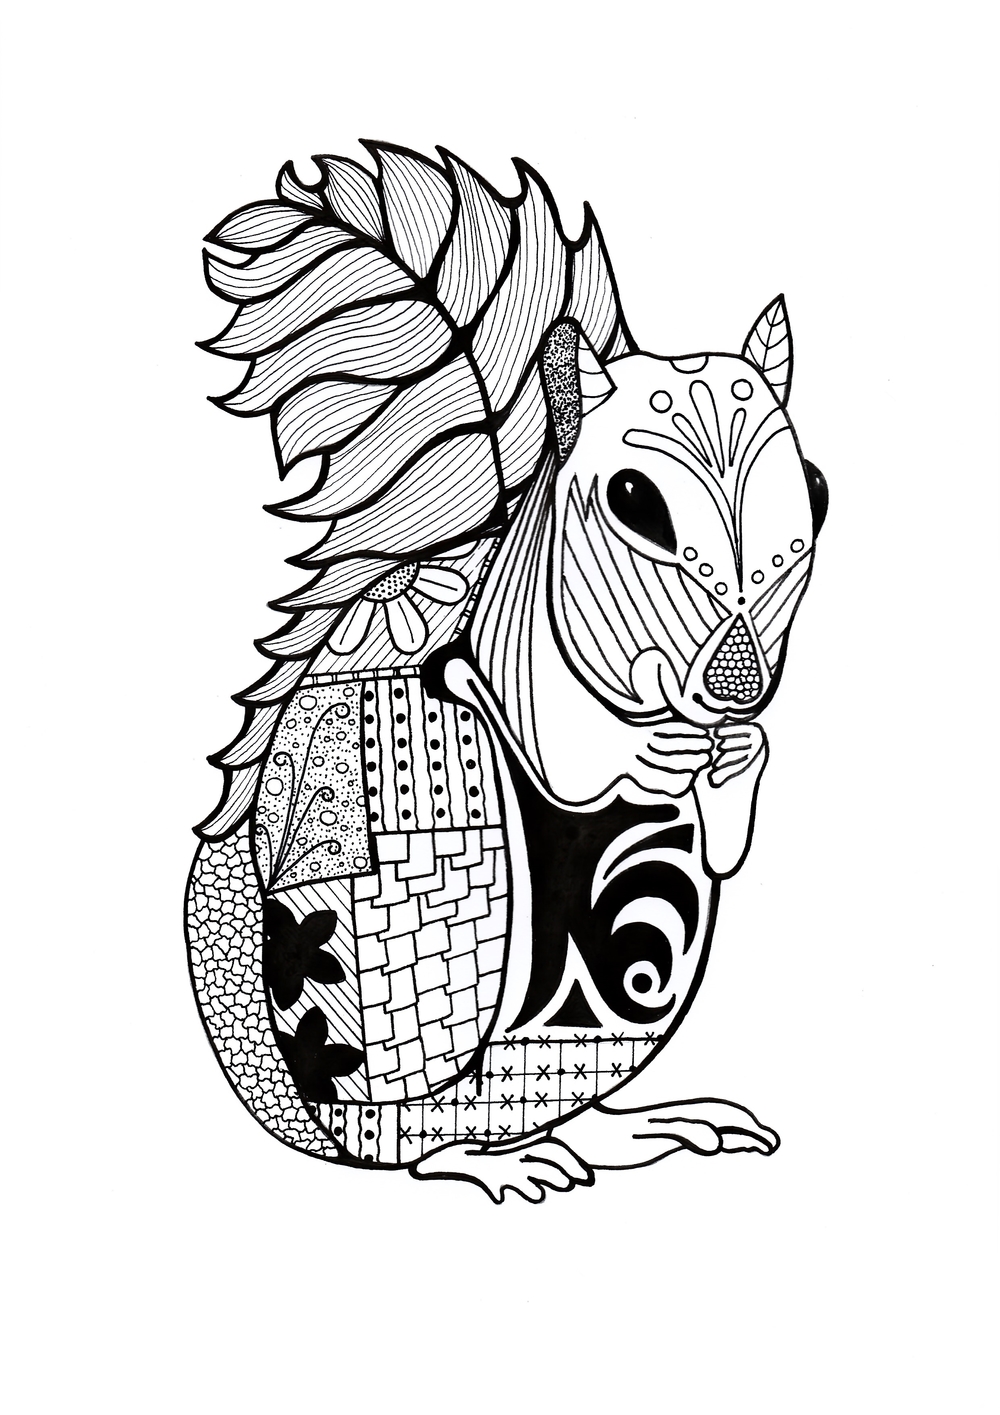 Intricate Squirrel Adult Coloring Page FaveCraftscom